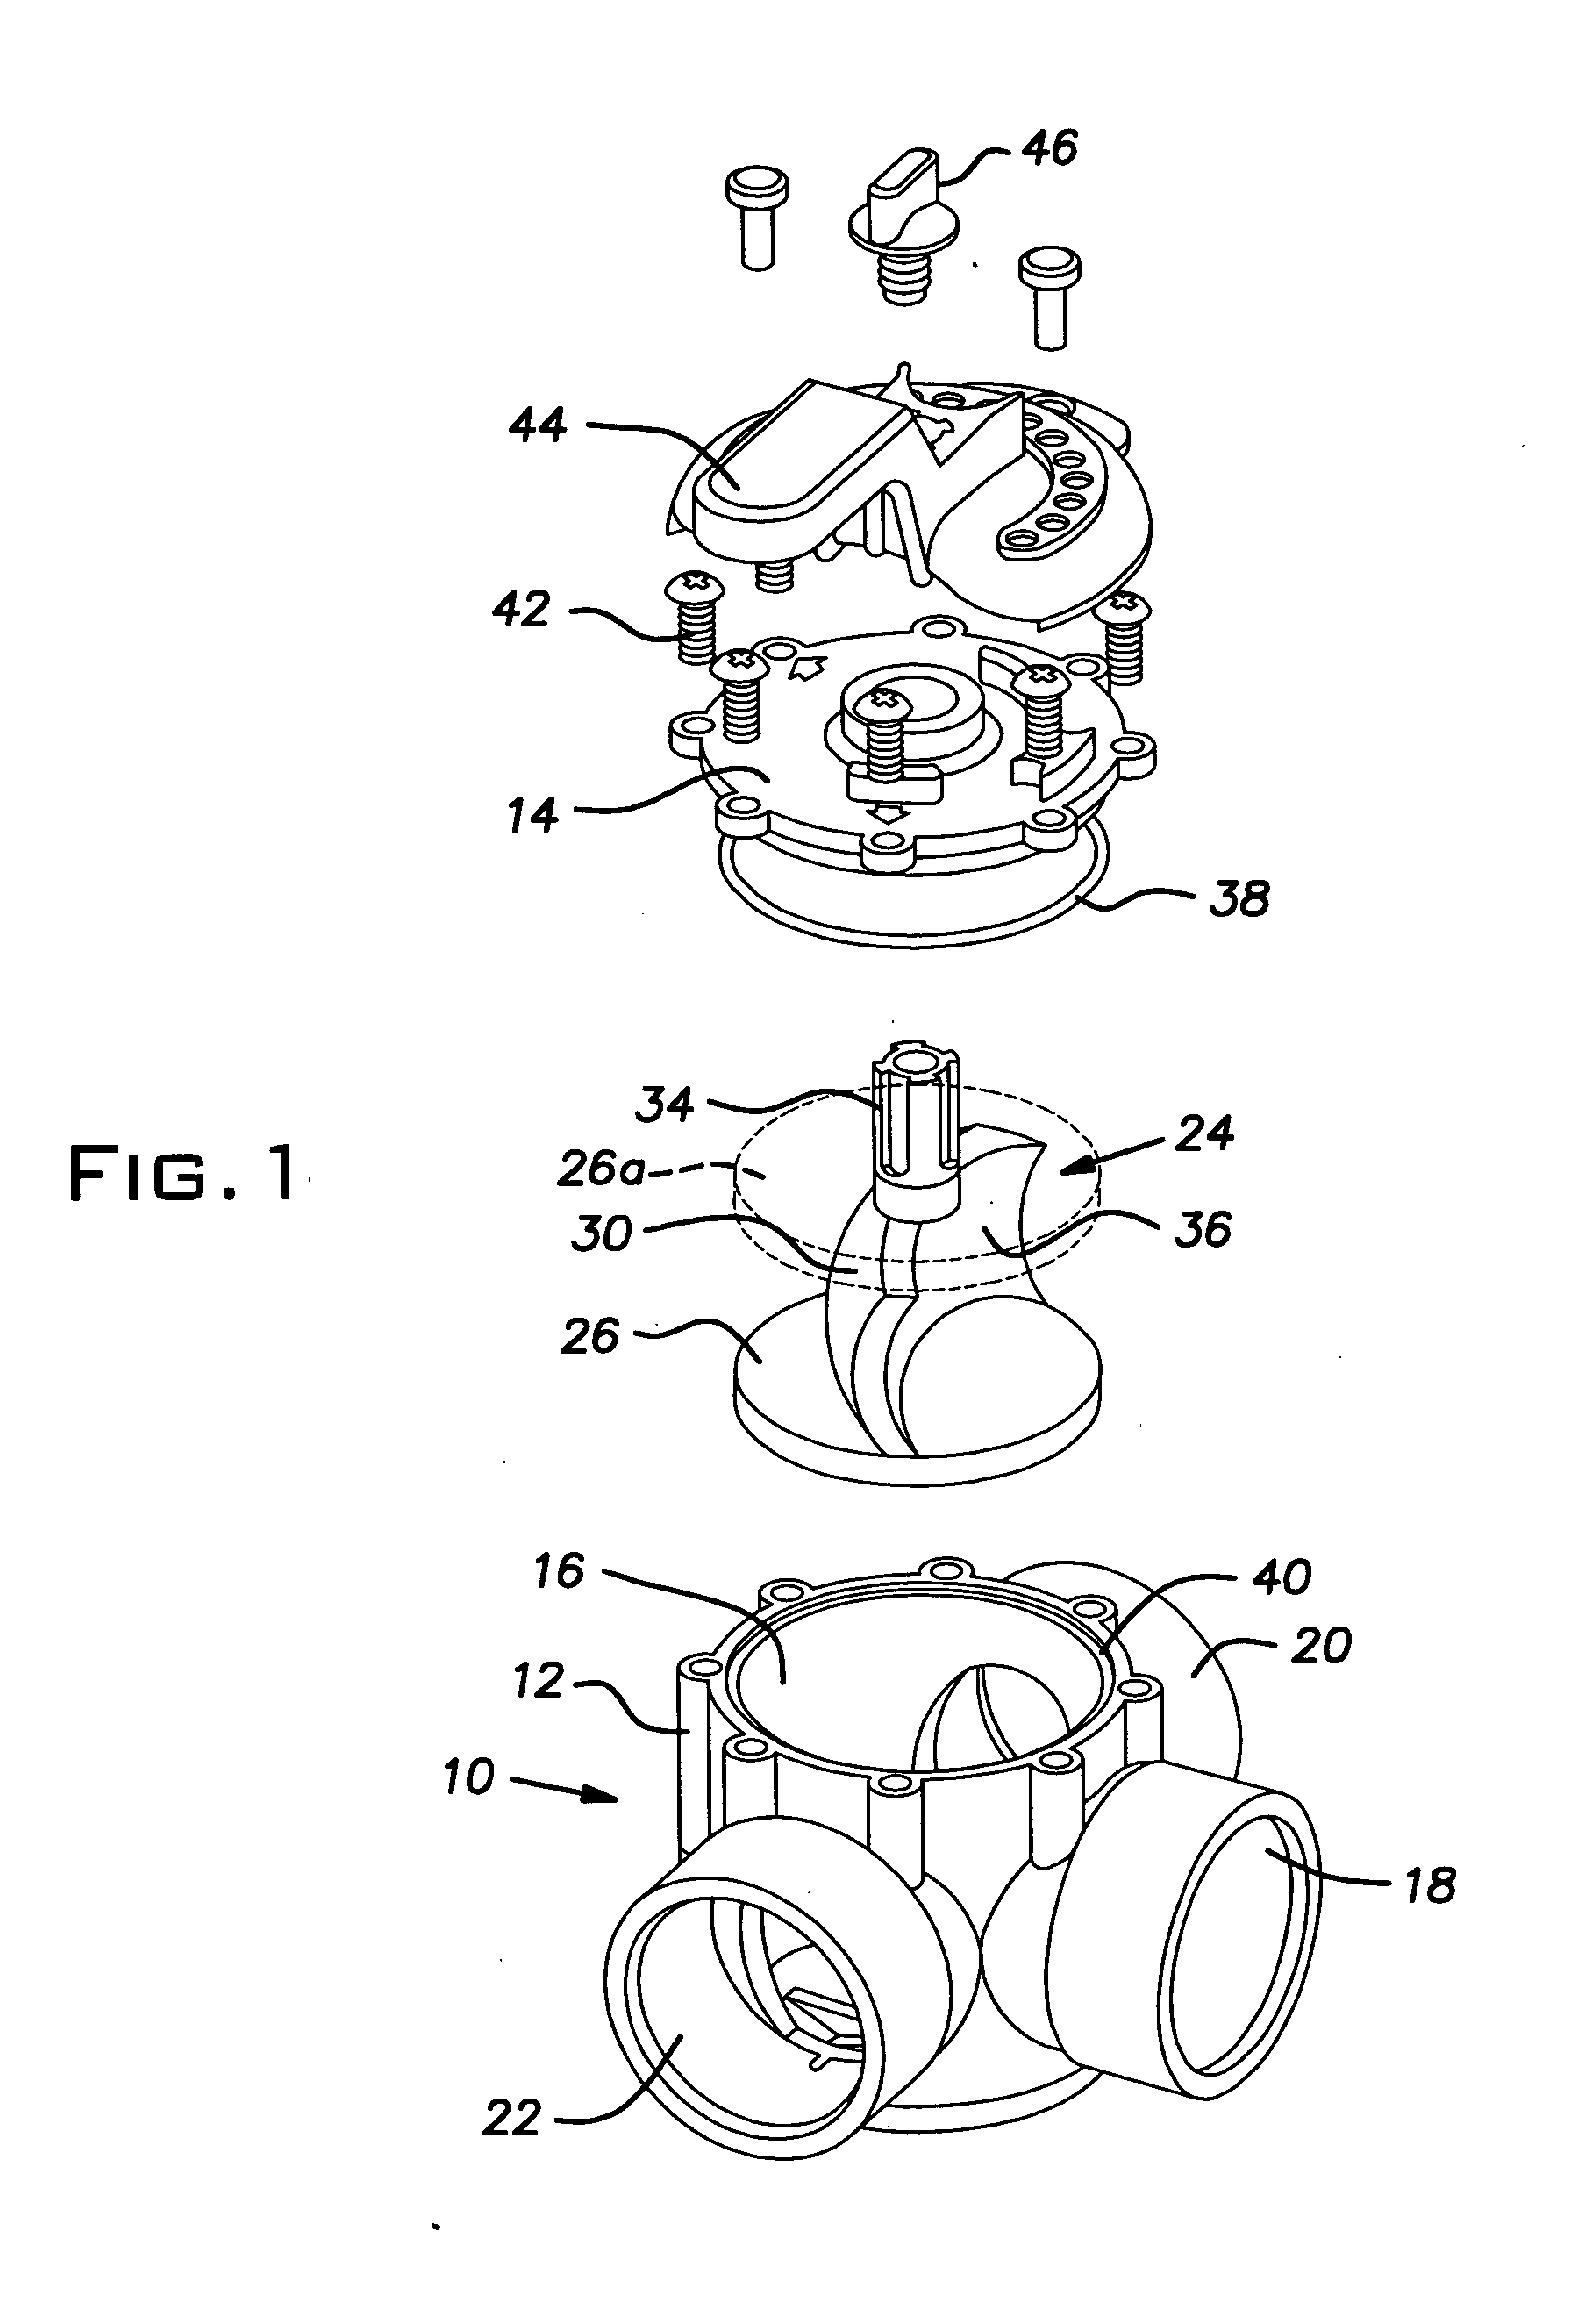 Valve with elbow joint diverter